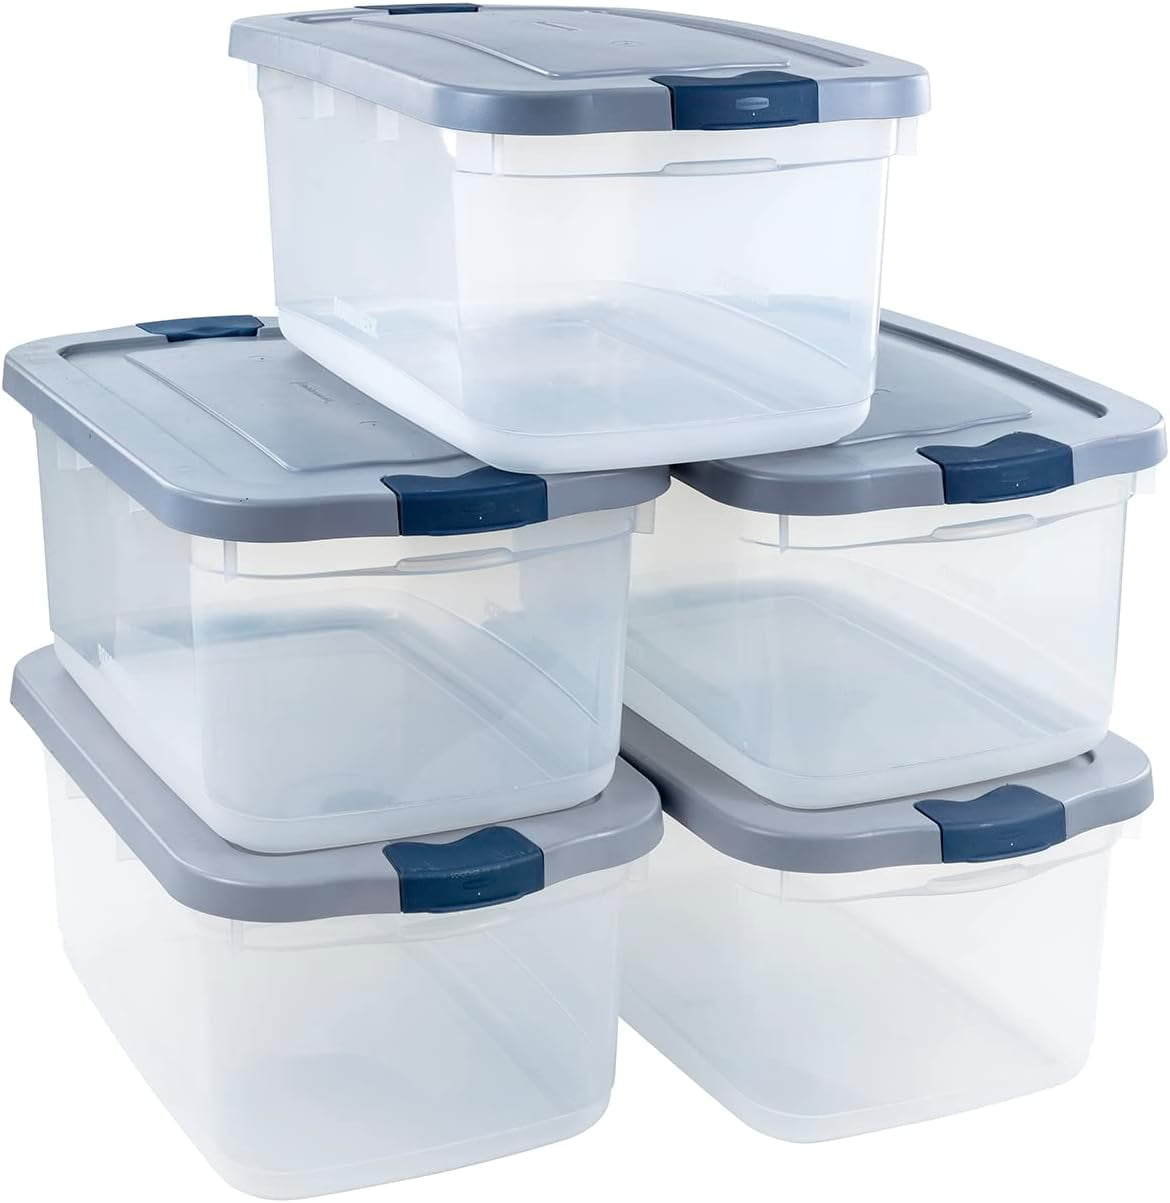 Pekky 50 Quart Clear Storage Containers/Bins with Lid，Wheels and Latching  Handles, Large Rolling Storage Plastic Box Tote(4Packs)